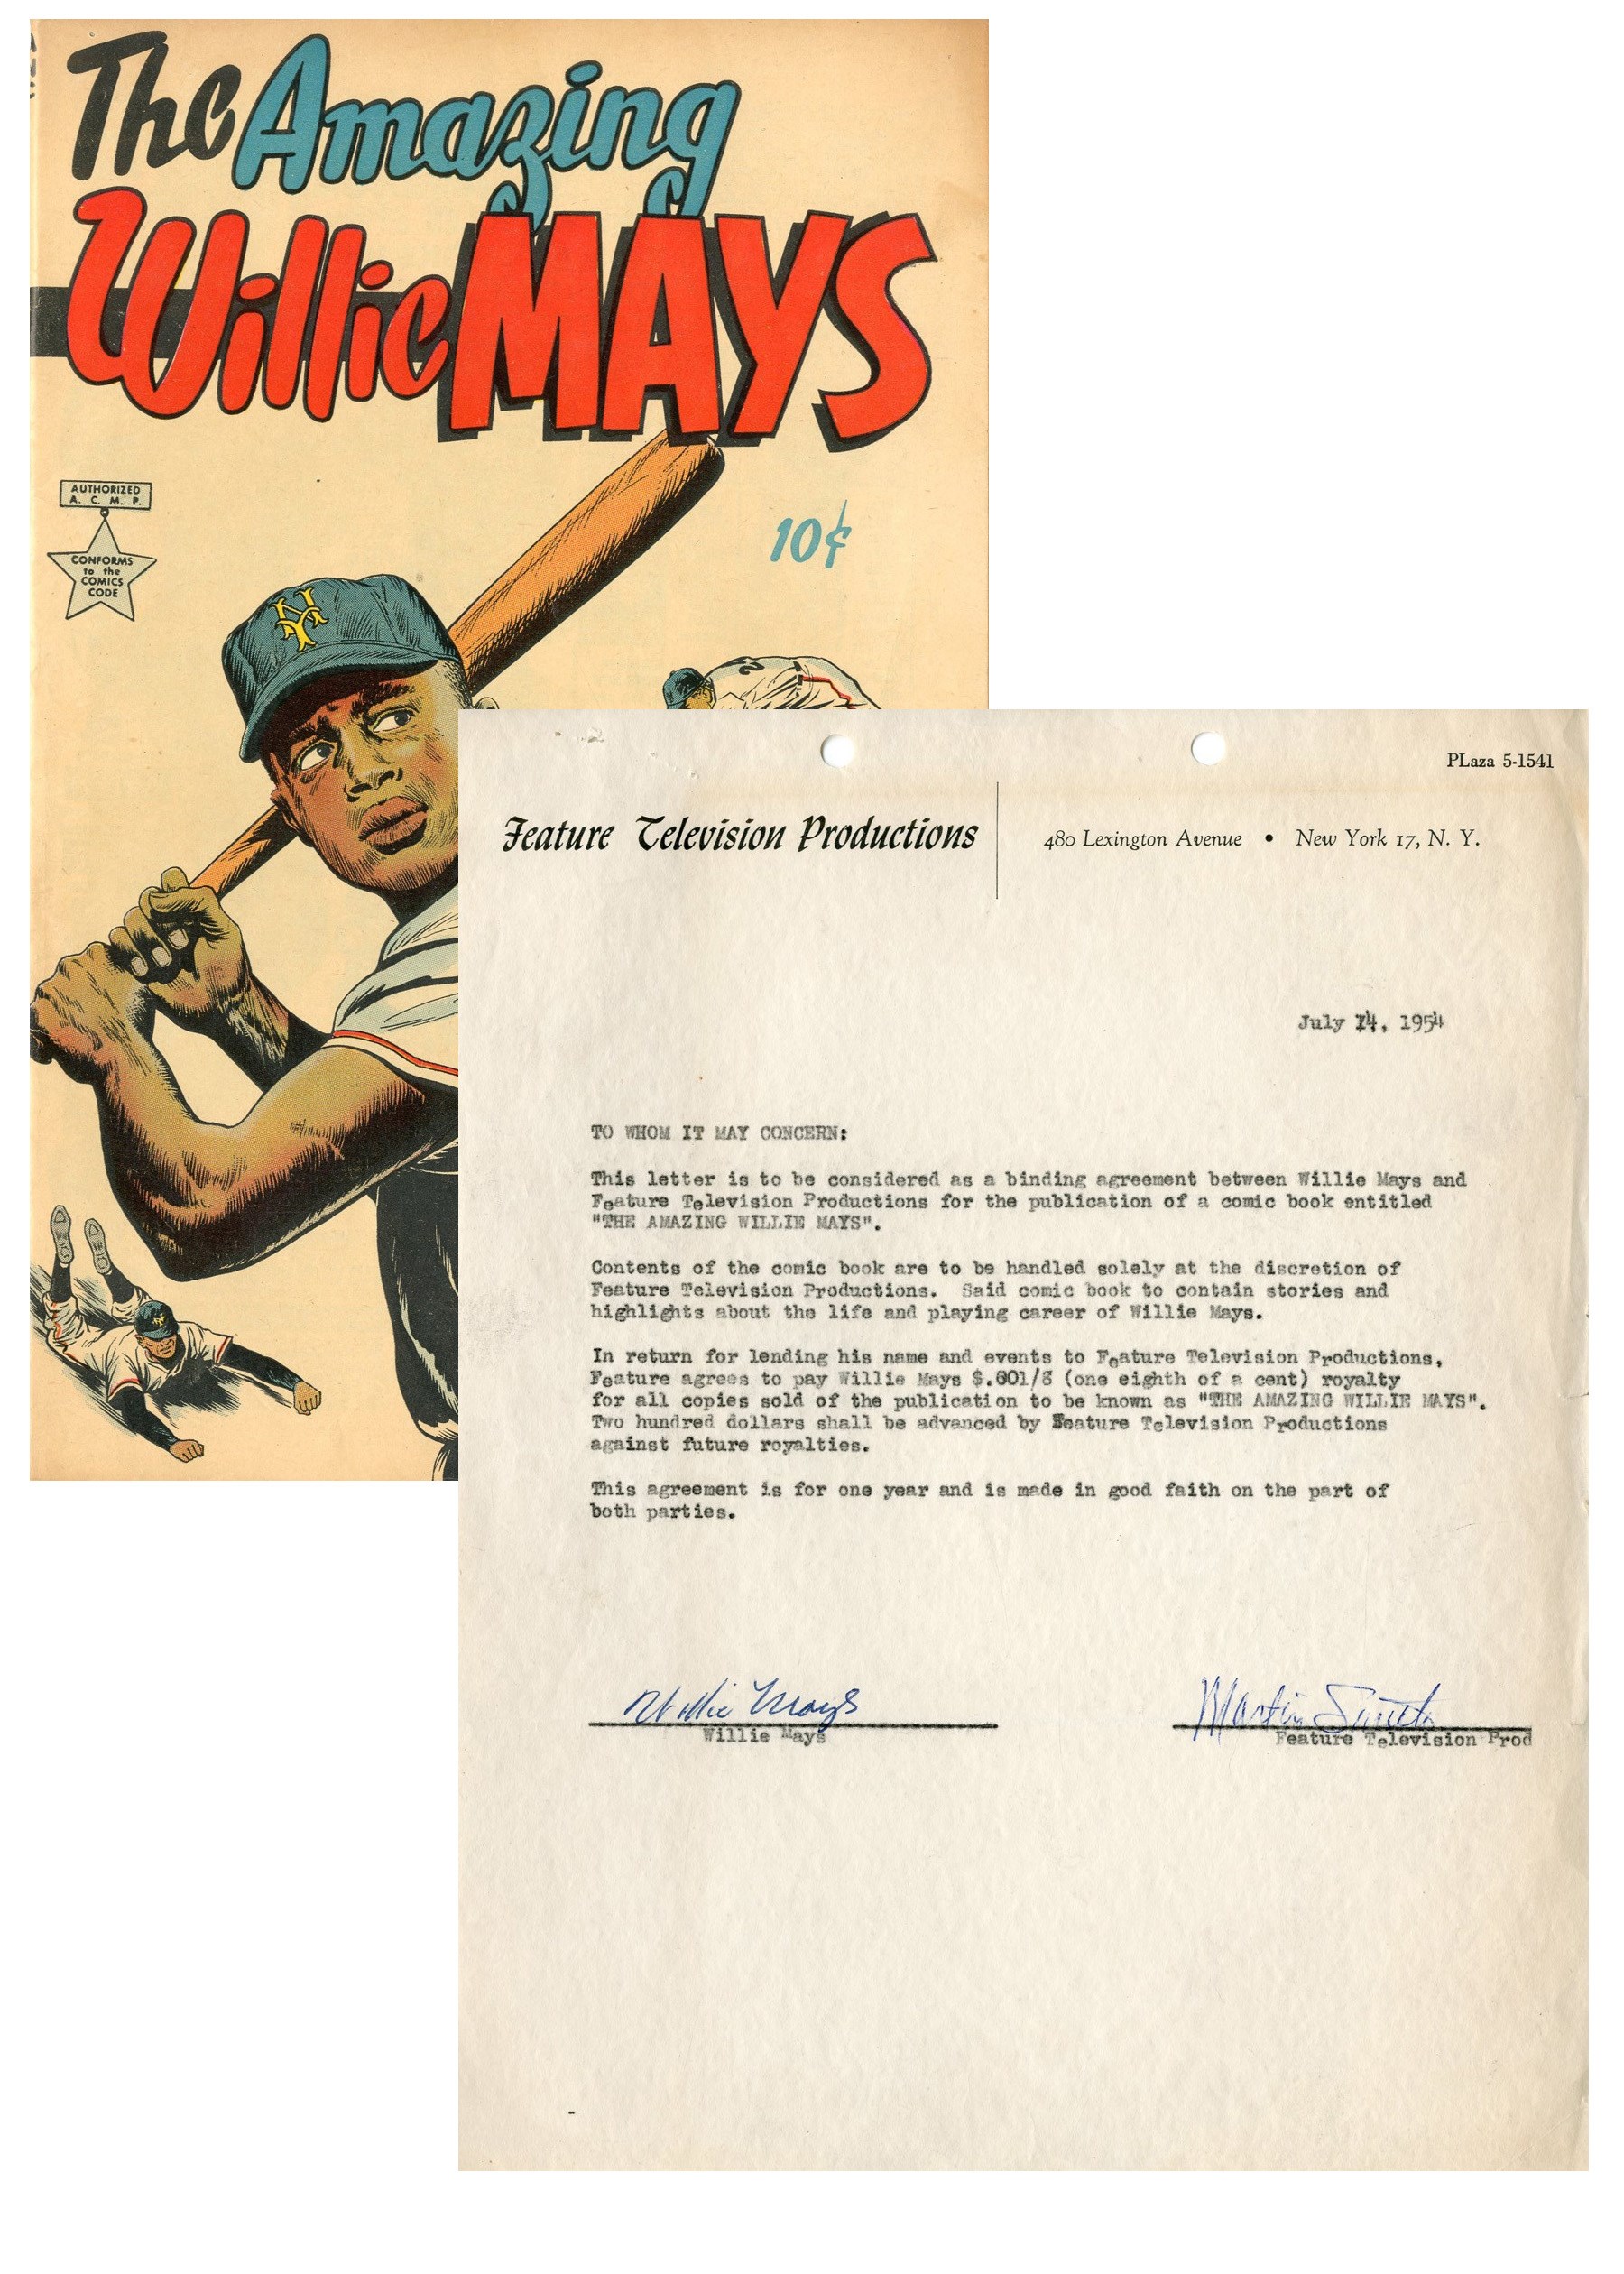 1954 Willie Mays Signed "The Amazing Willie Mays" Comic Book Contract (PSA)